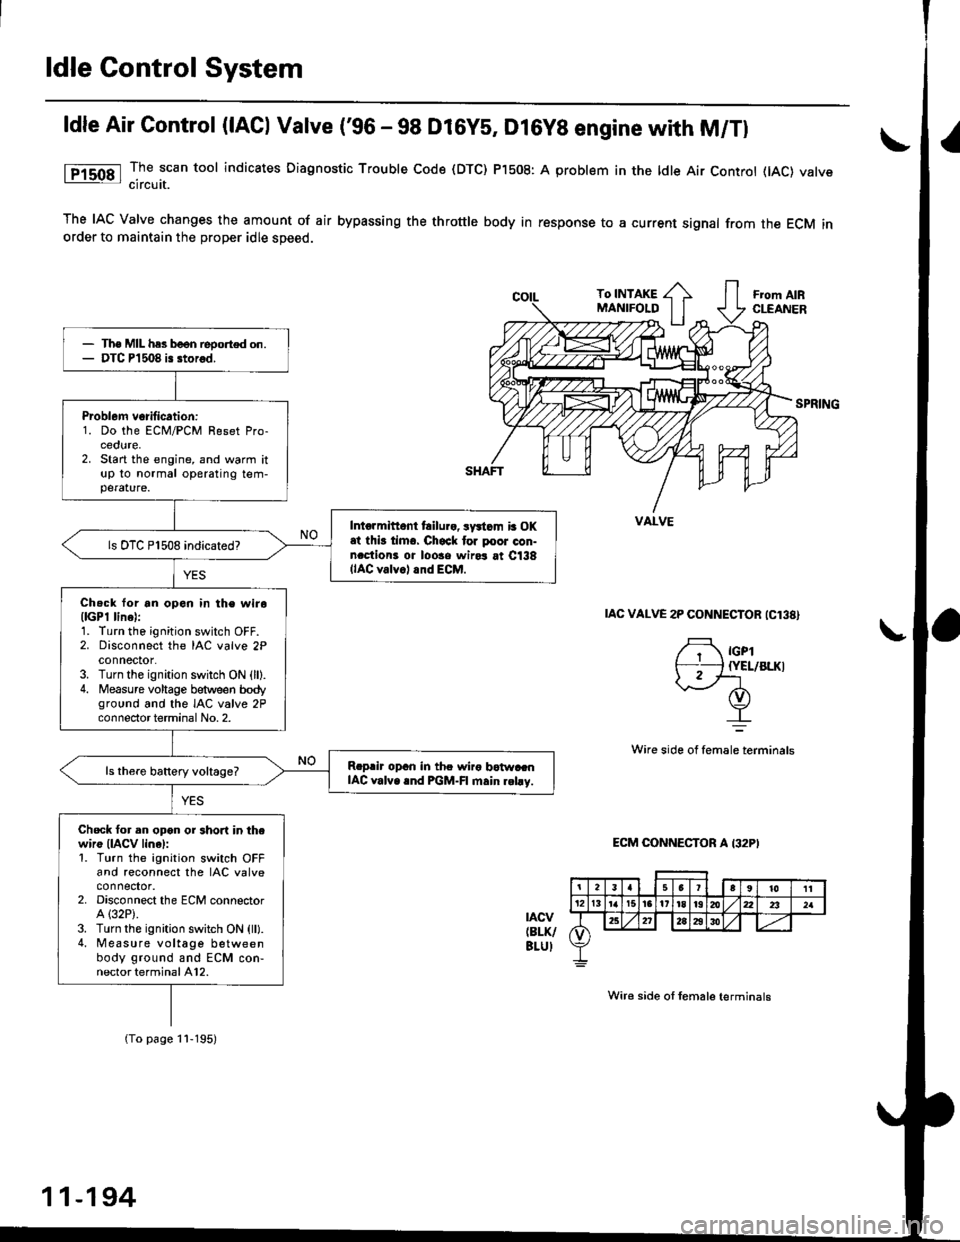 HONDA CIVIC 1996 6.G Workshop Manual ldle Control System
ldle Air Control (lACl Vatve (96 - 98 Dl6ys, Dl6yB engine with M/Tl
The scan tool indicates Diagnostic Trouble Code (DTC) P1508: A problem in the ldle Air Controt flAC) varvecircu